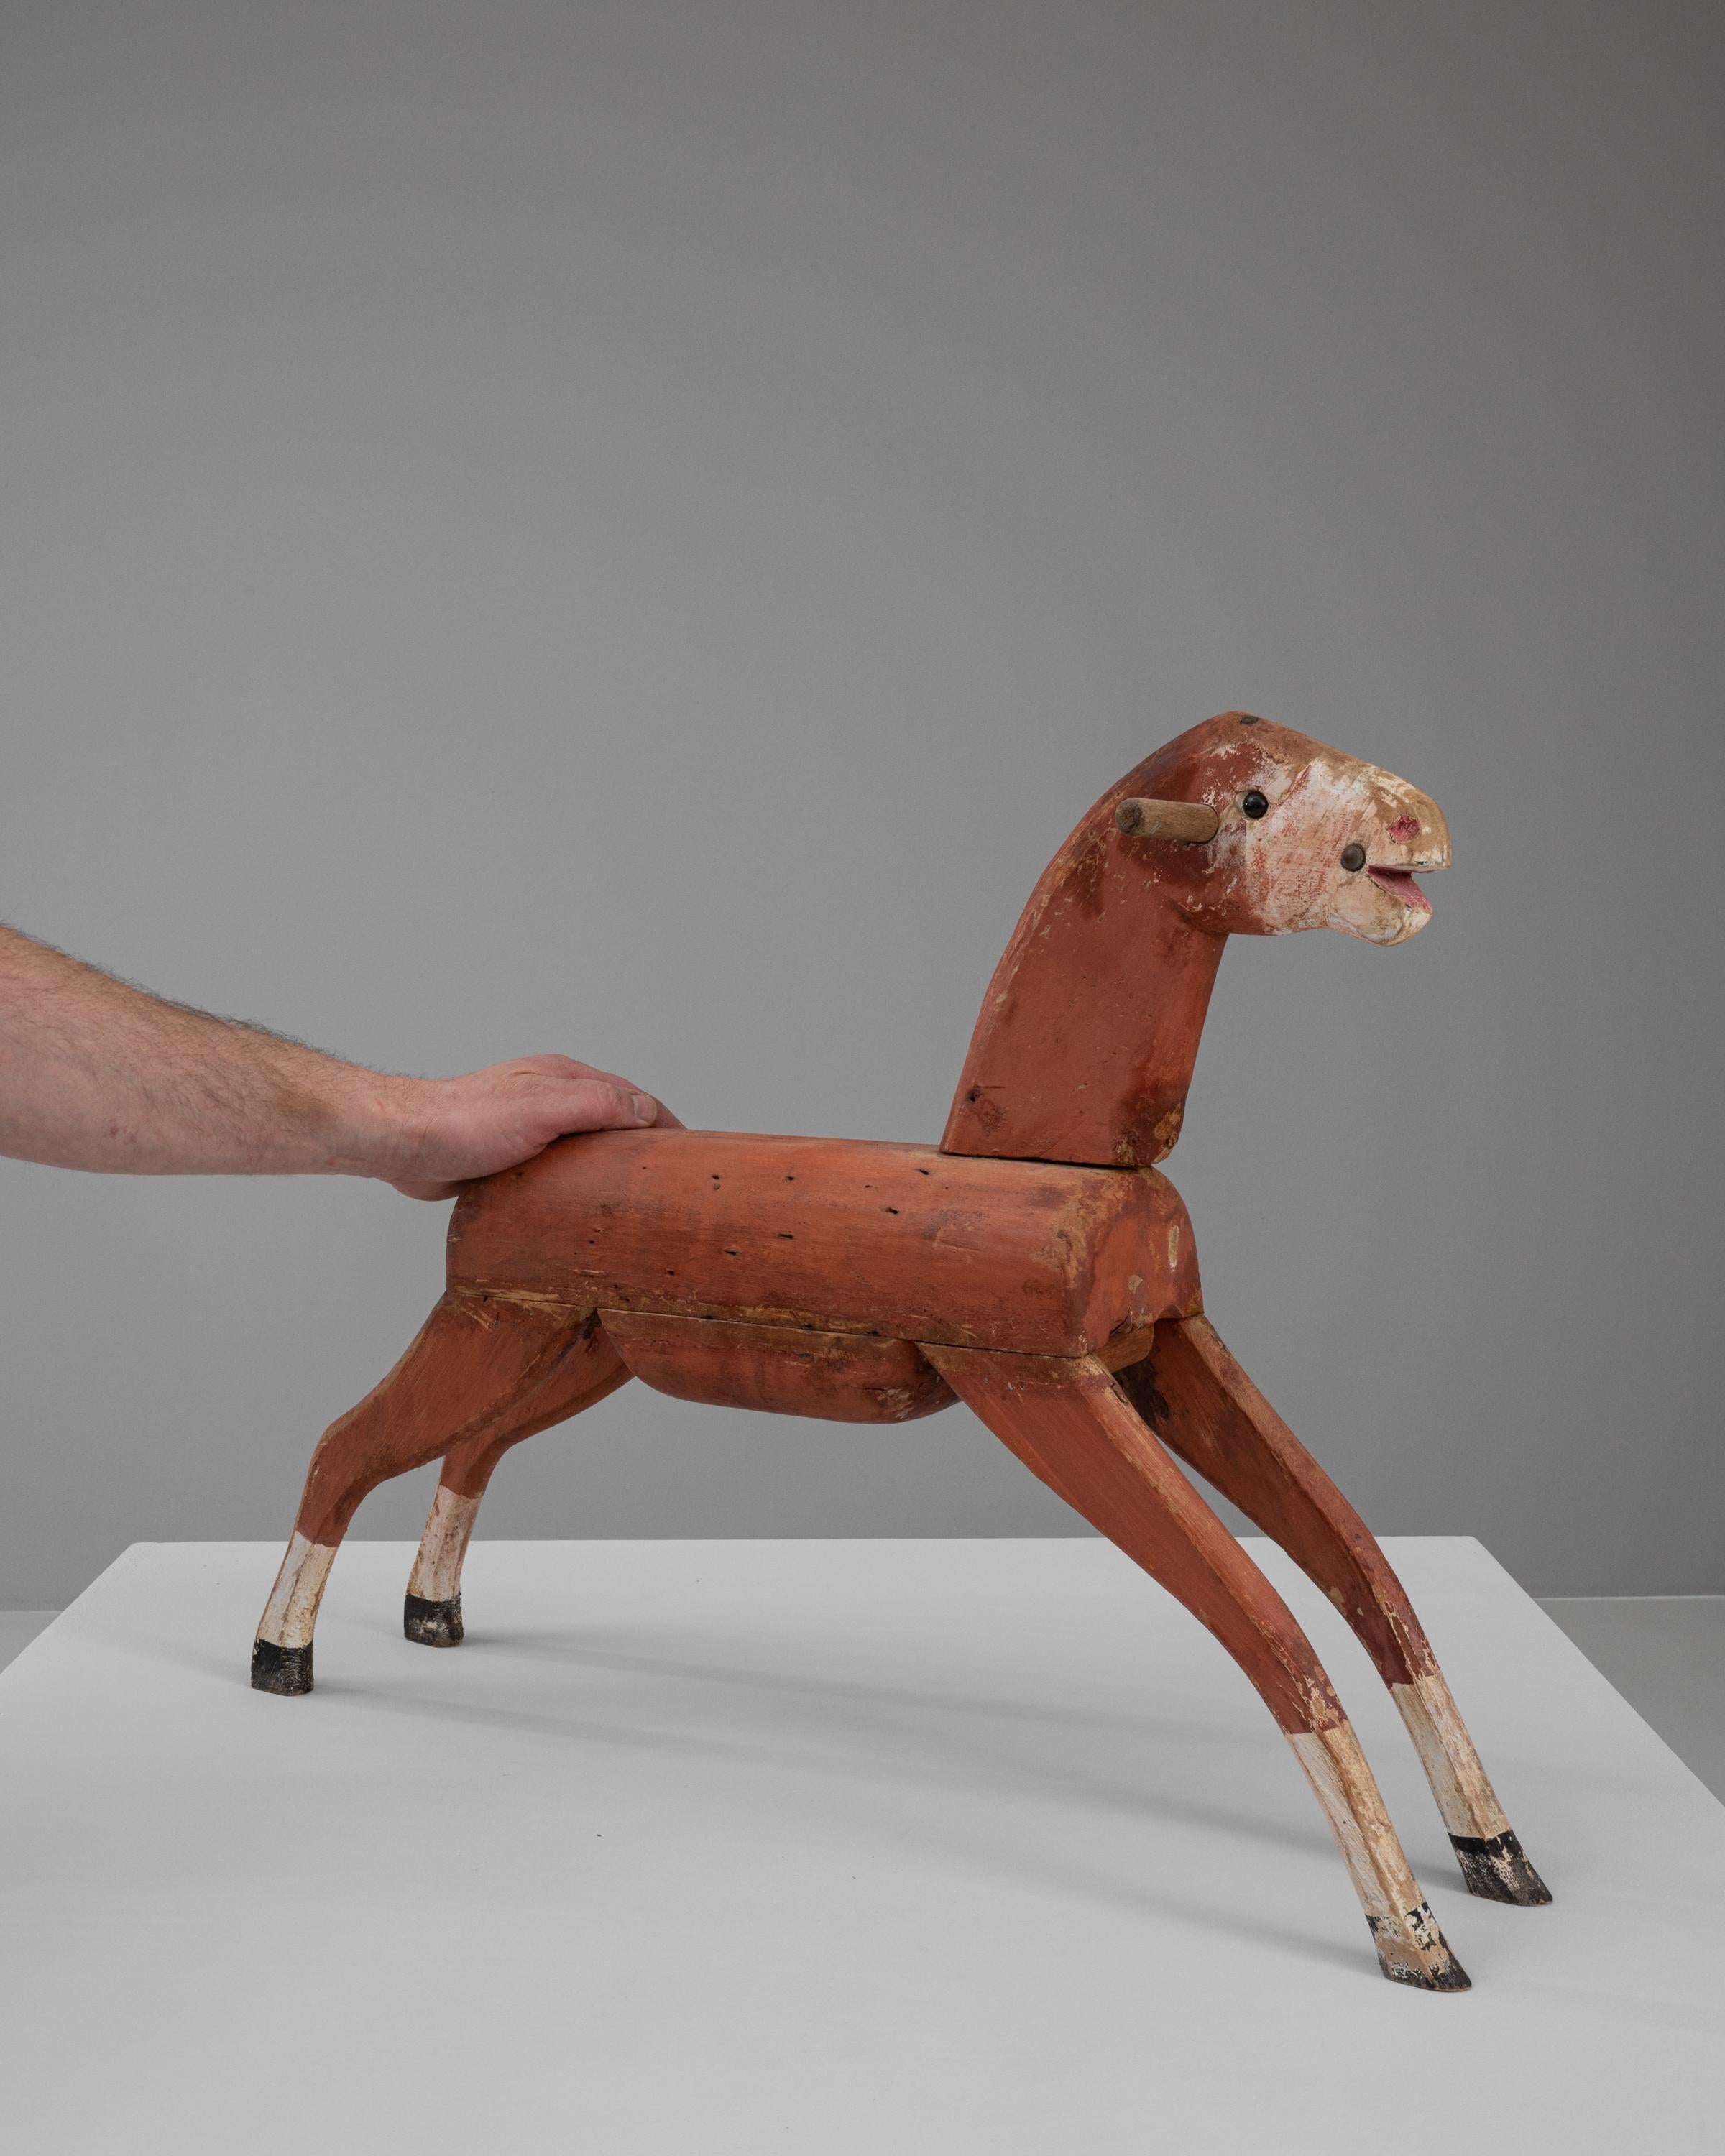 This Early 20th Century French Wooden Horse is a captivating piece of folk art, rich with rustic charm and historical character. Crafted from wood and painted in a warm, earthy red with natural wear and patina, it exudes a sense of nostalgia and